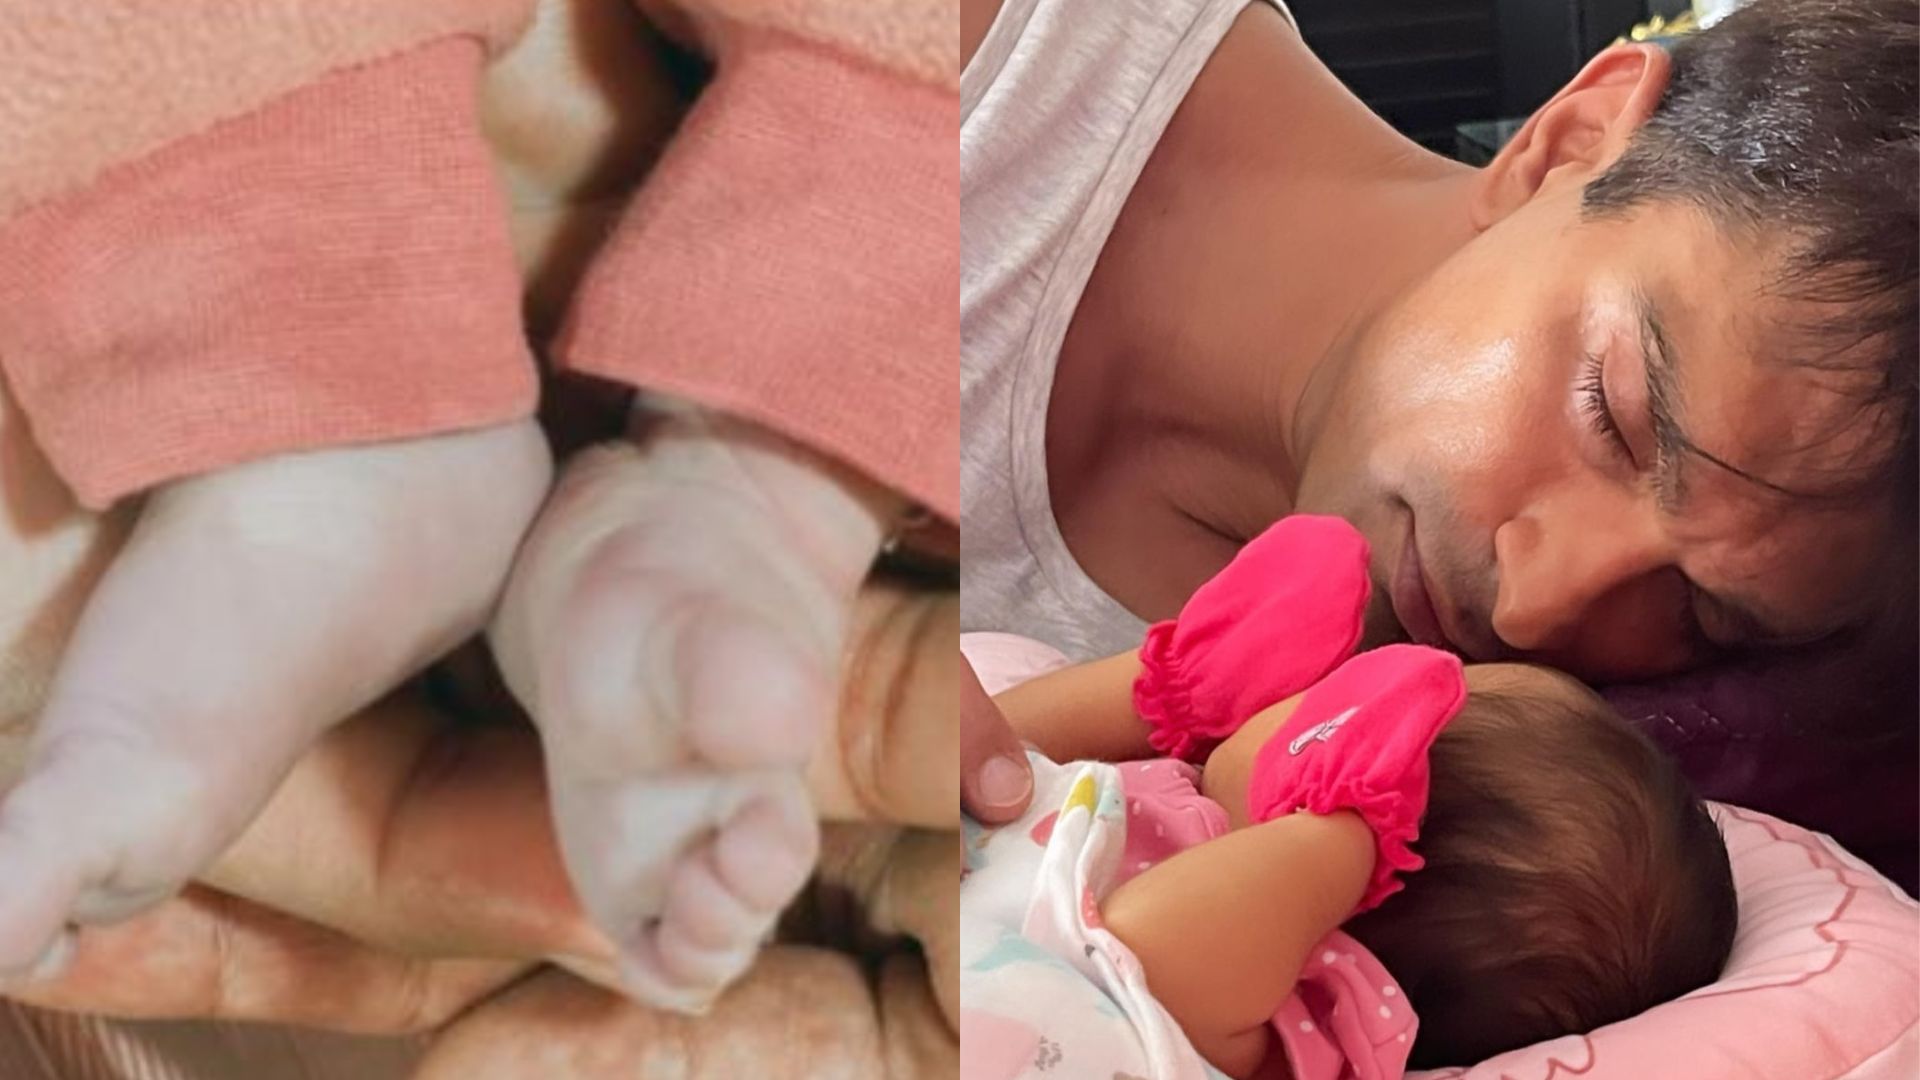 Bipasha Basu Blesses Our Feeds With An Adorable Picture Of Devi And Her Dad, Karan Singh Grover!